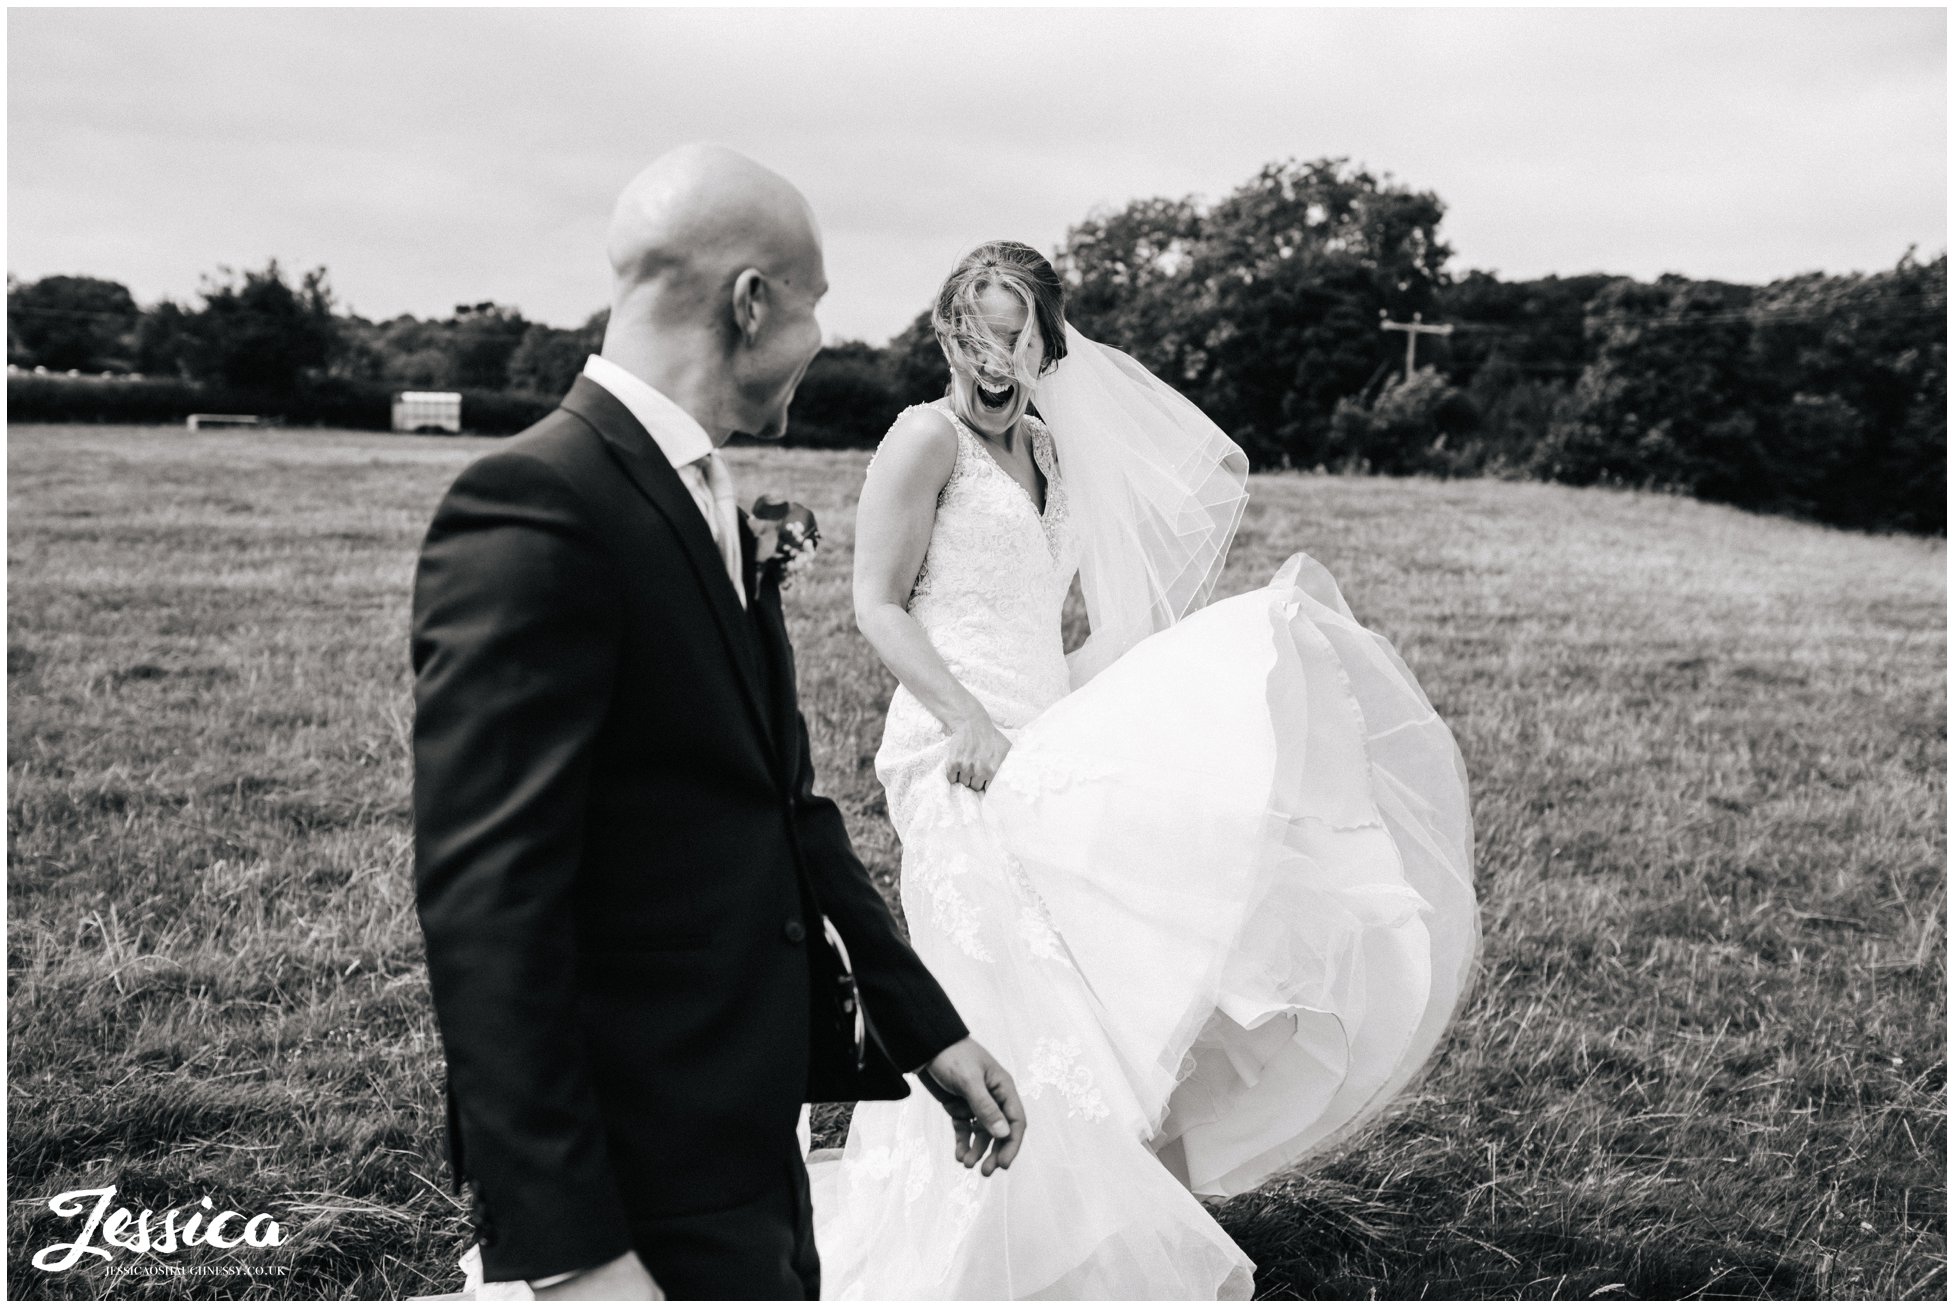 windswept bride walking through fields with her groom - tower hill barns wedding photographer